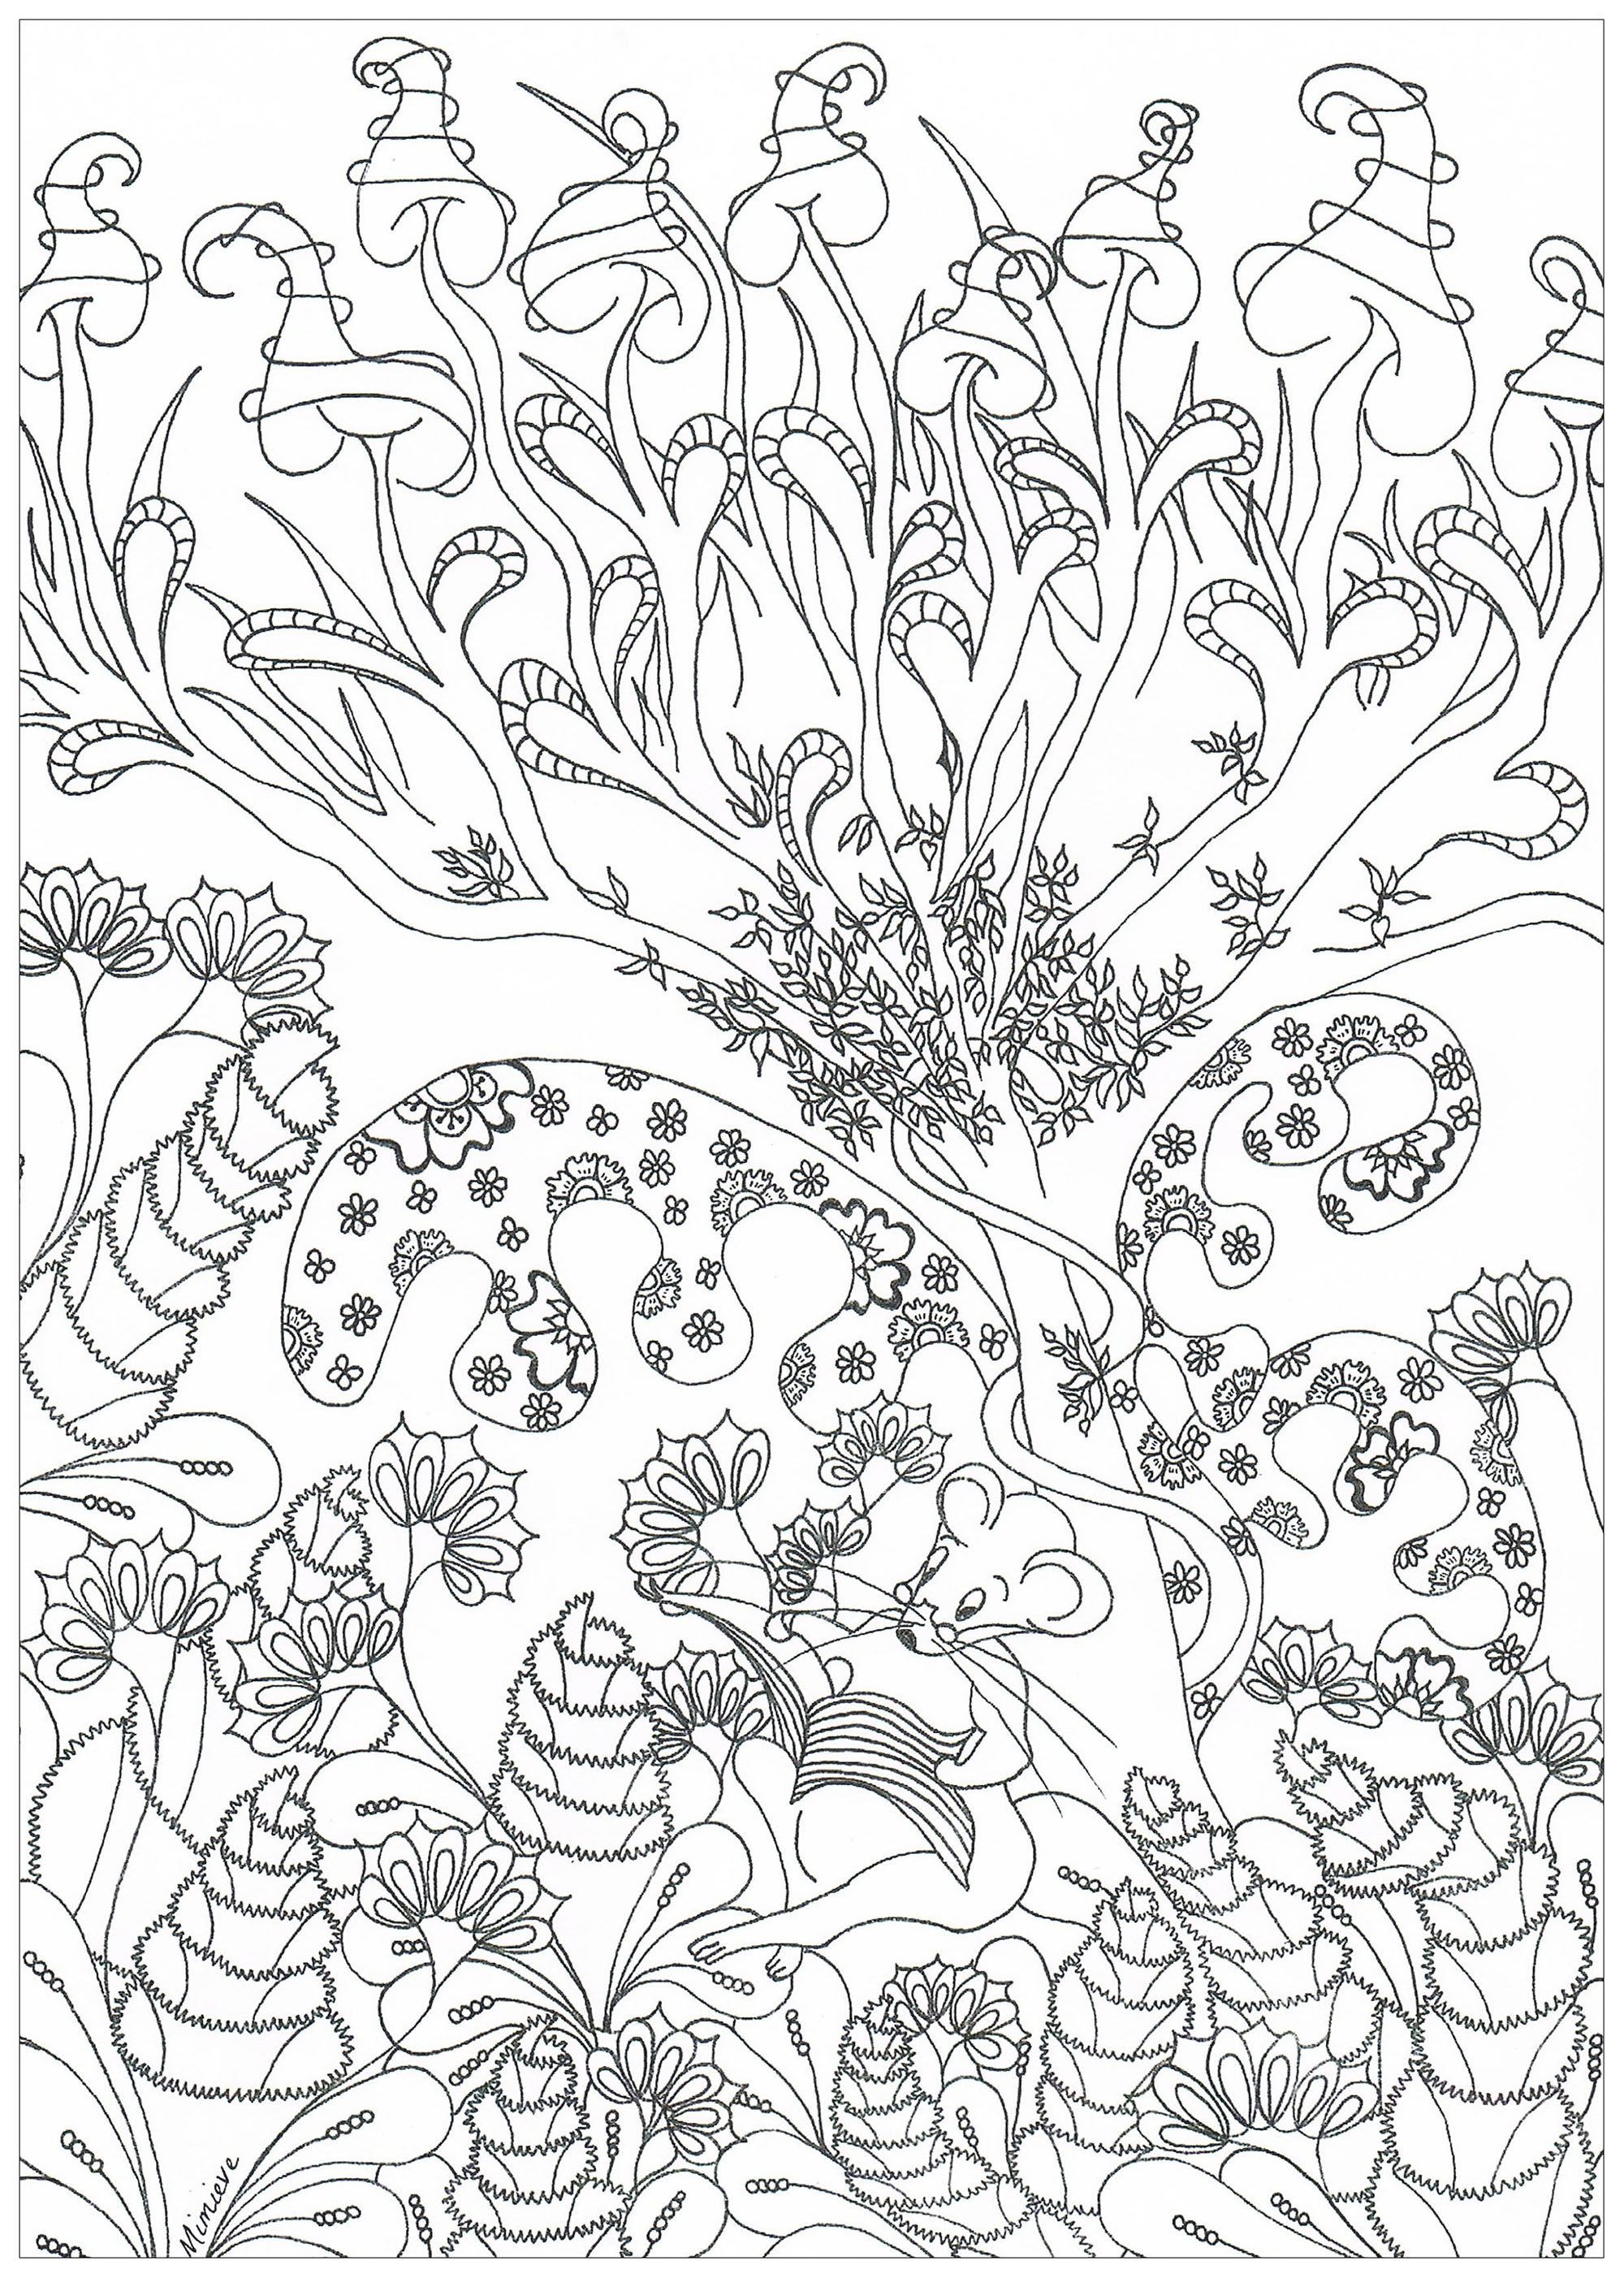 Enchanted forest - Jungle & Forest Adult Coloring Pages